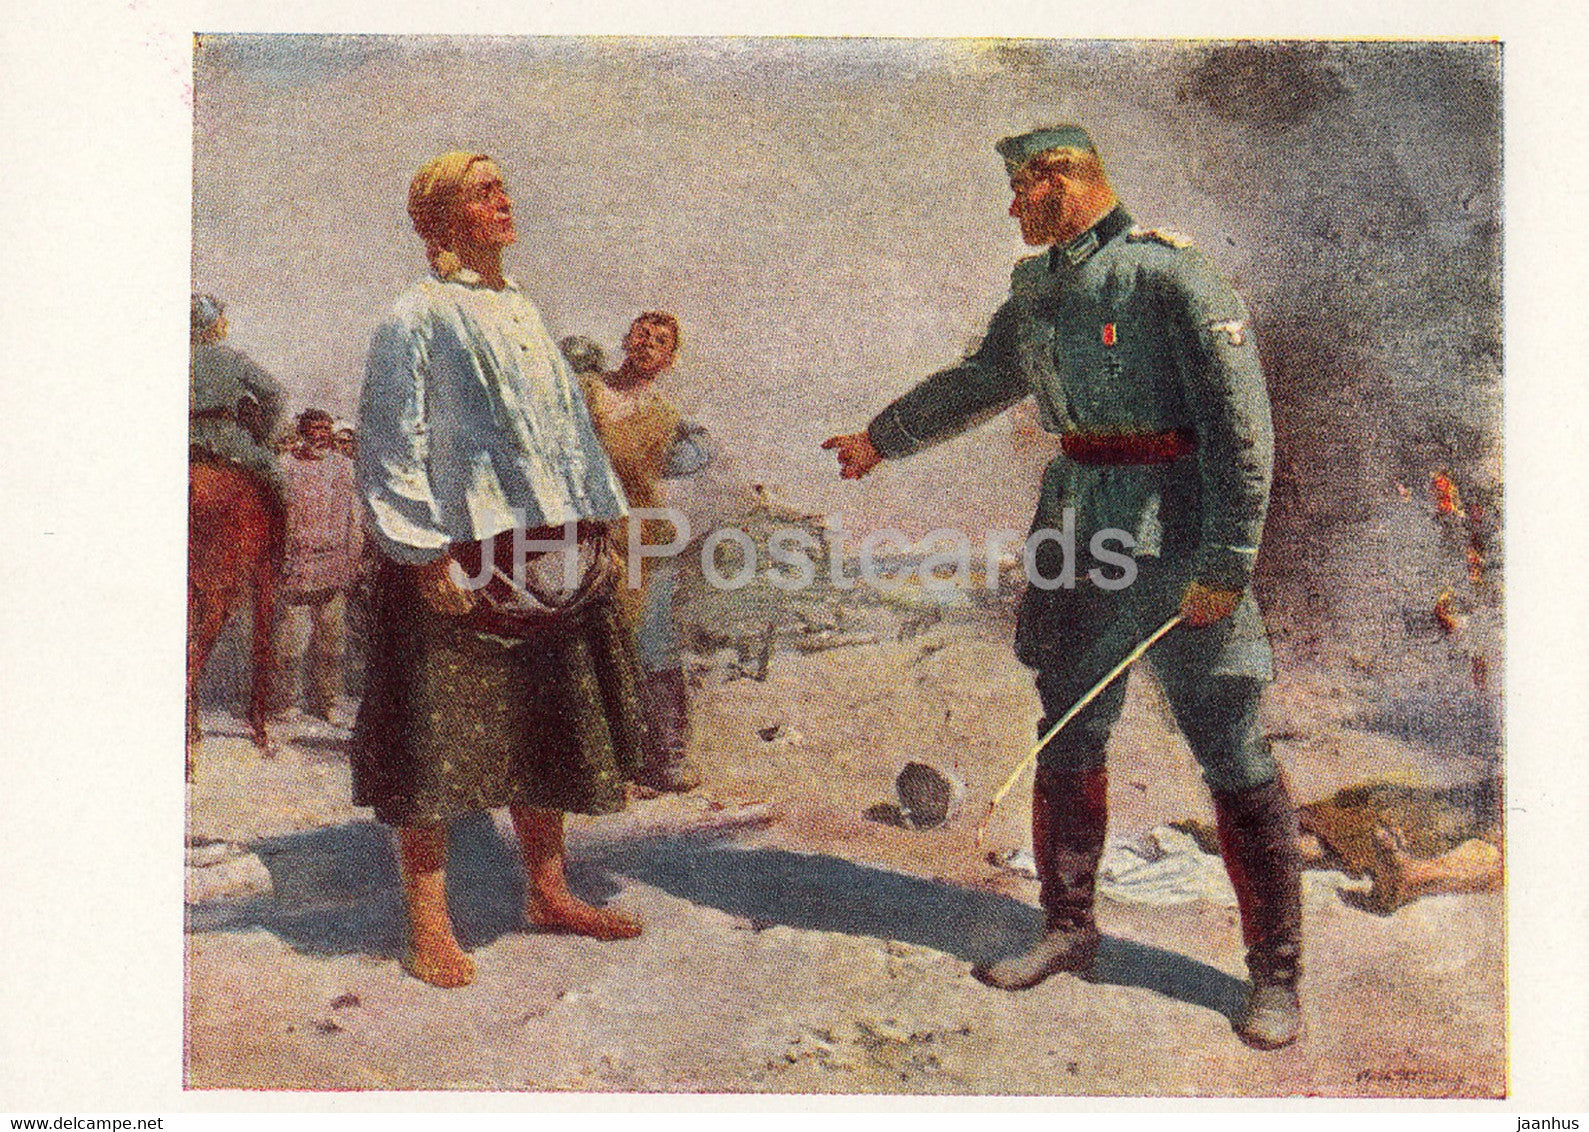 painting by S. Gerasimov - Partizan's Mother - Nazi - German officer - Russian art - 1965 - Russia USSR - unused - JH Postcards